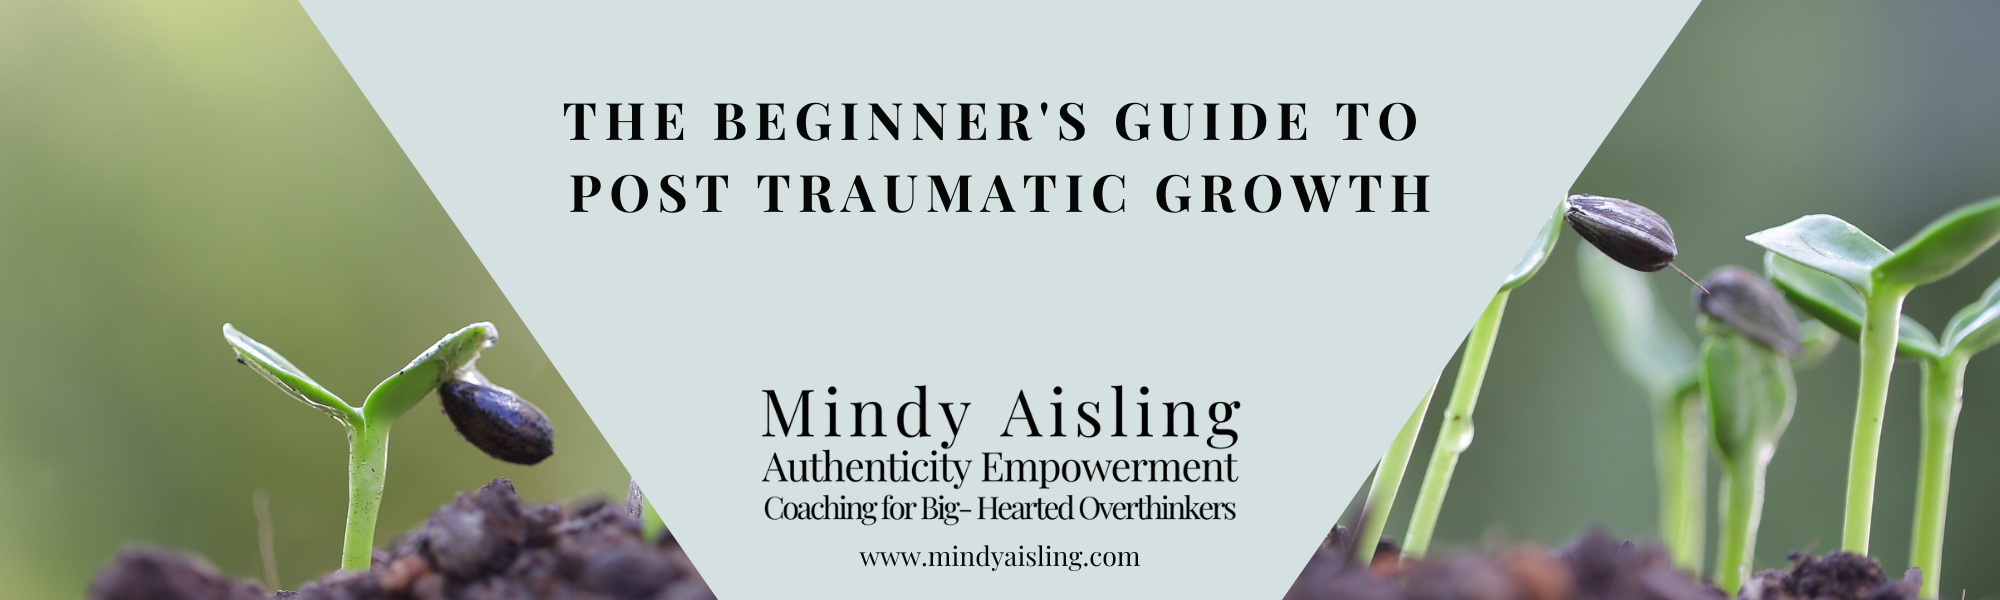 The Beginner's Guide to Post Traumatic Growth